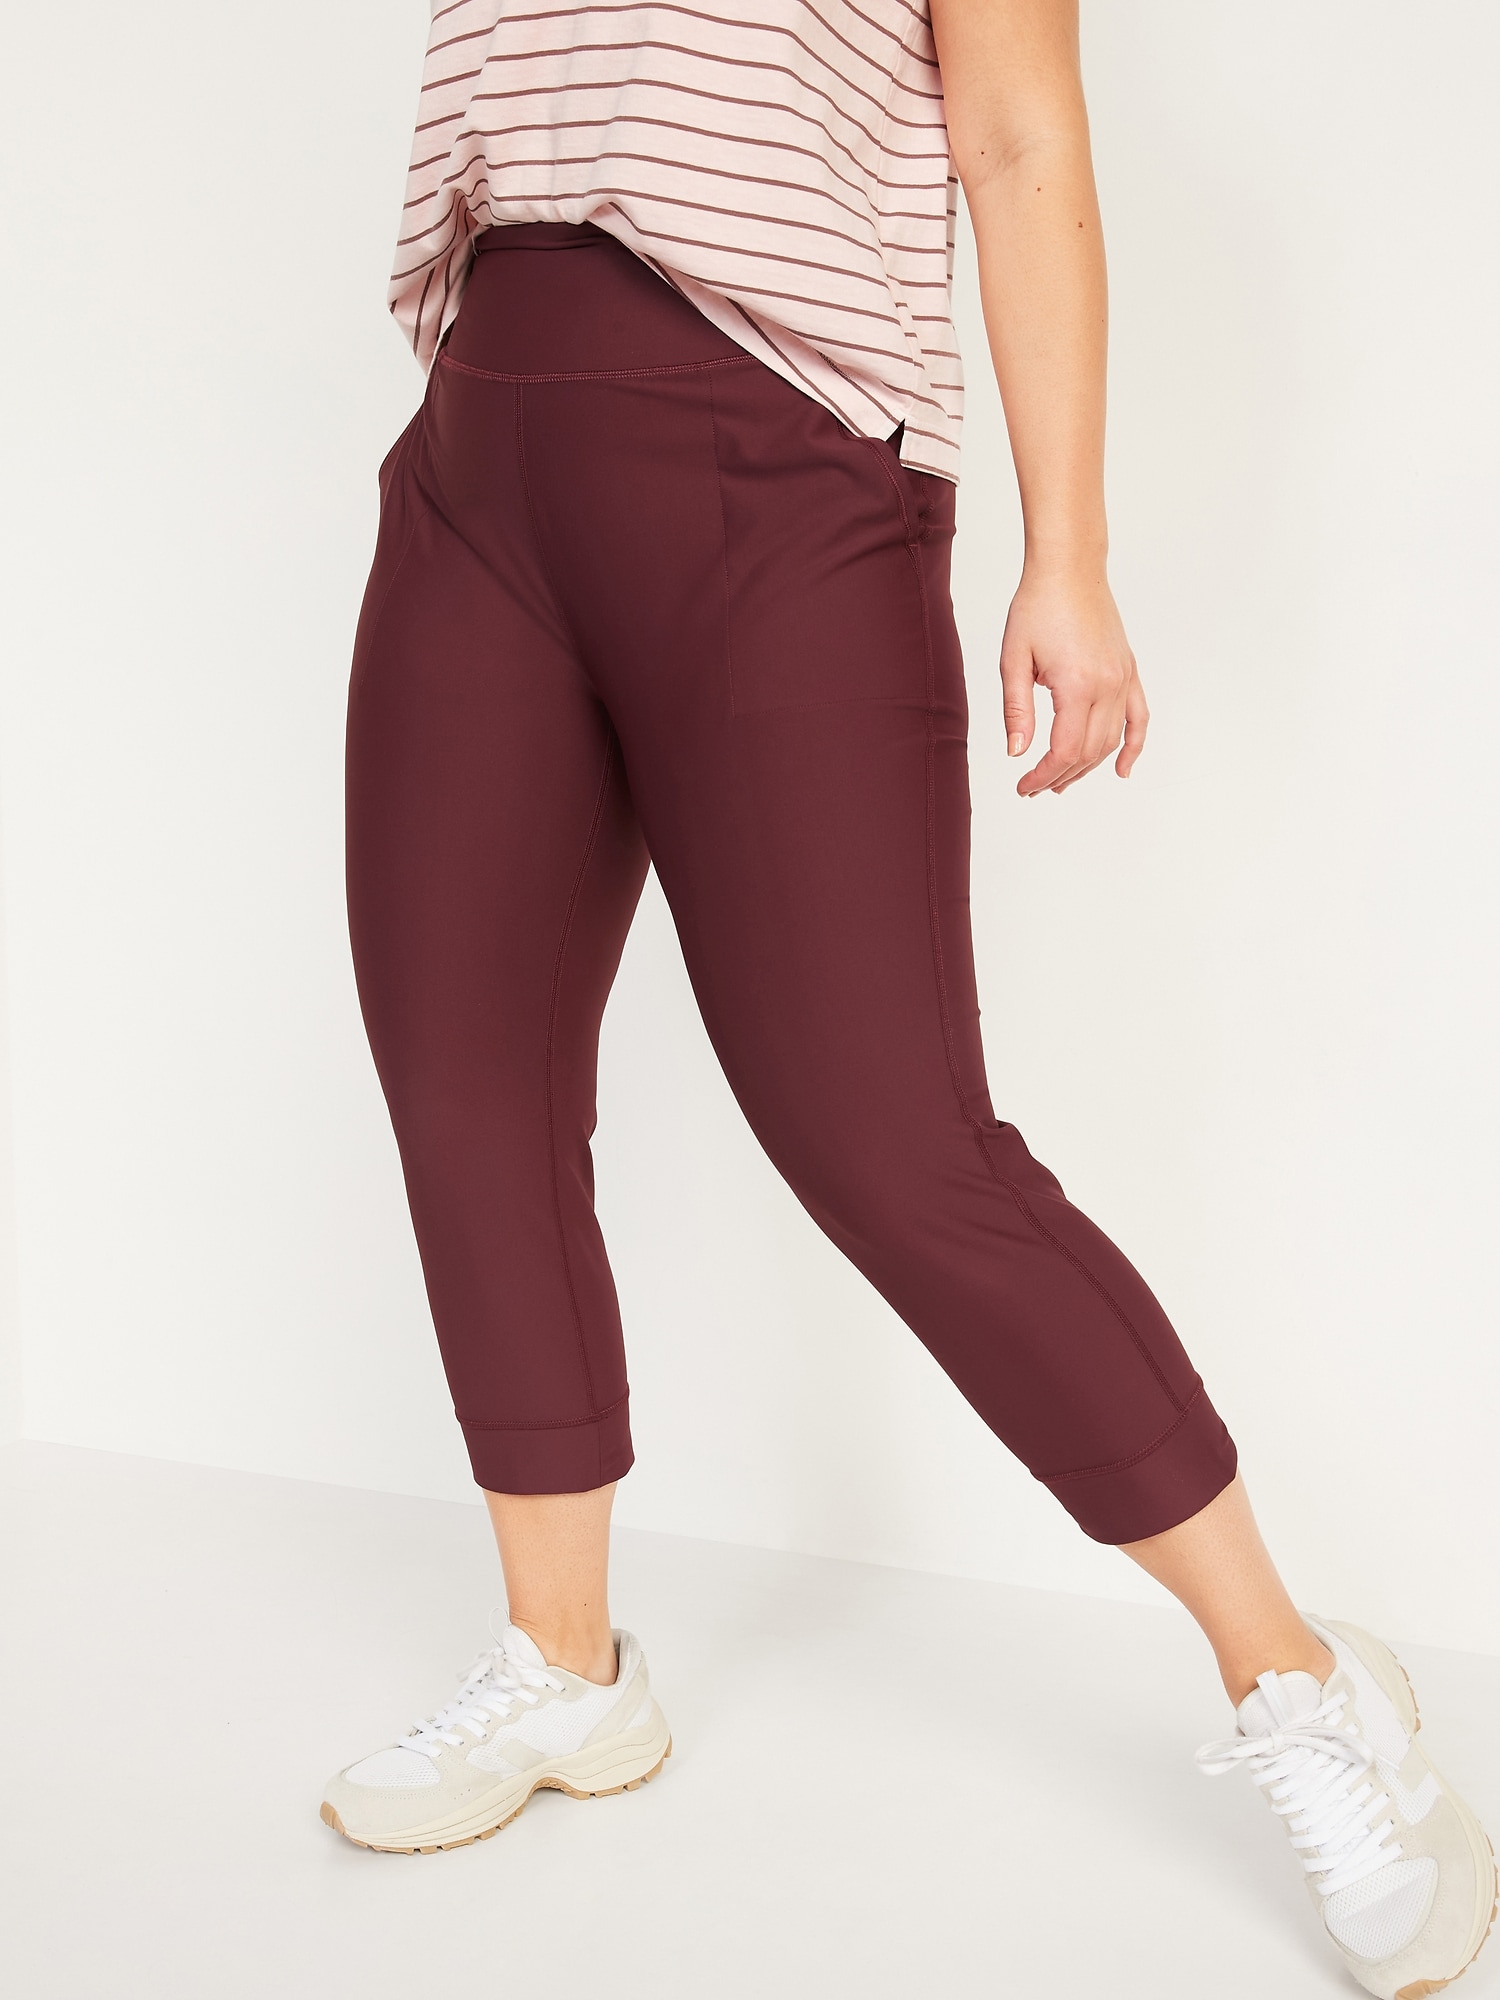 Old Navy High-Waisted PowerSoft Crop Jogger Pants, 27 Reasons Not to Miss  Old Navy's Sale on Workout Clothes — Including $9 Yoga Pants!